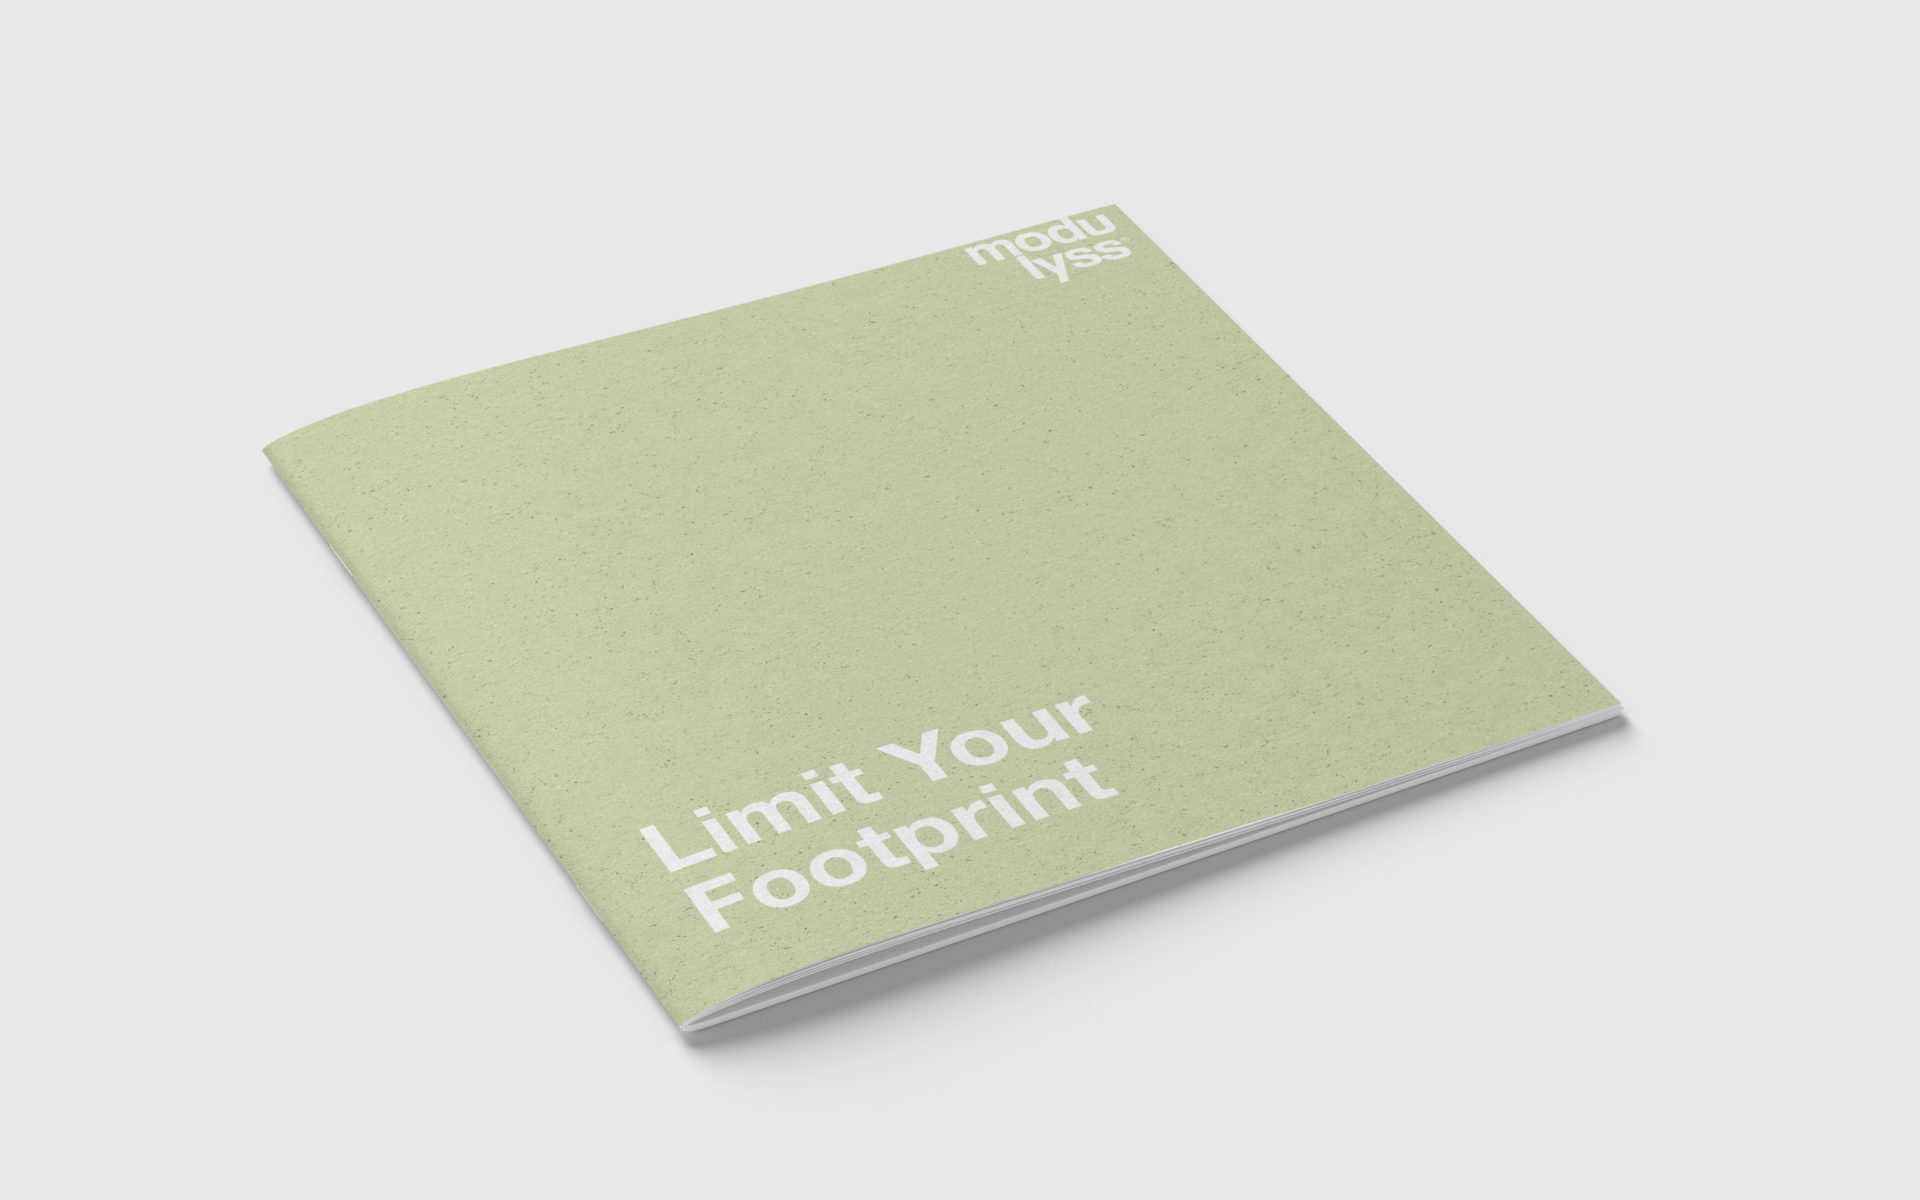 The limit your footprint programme